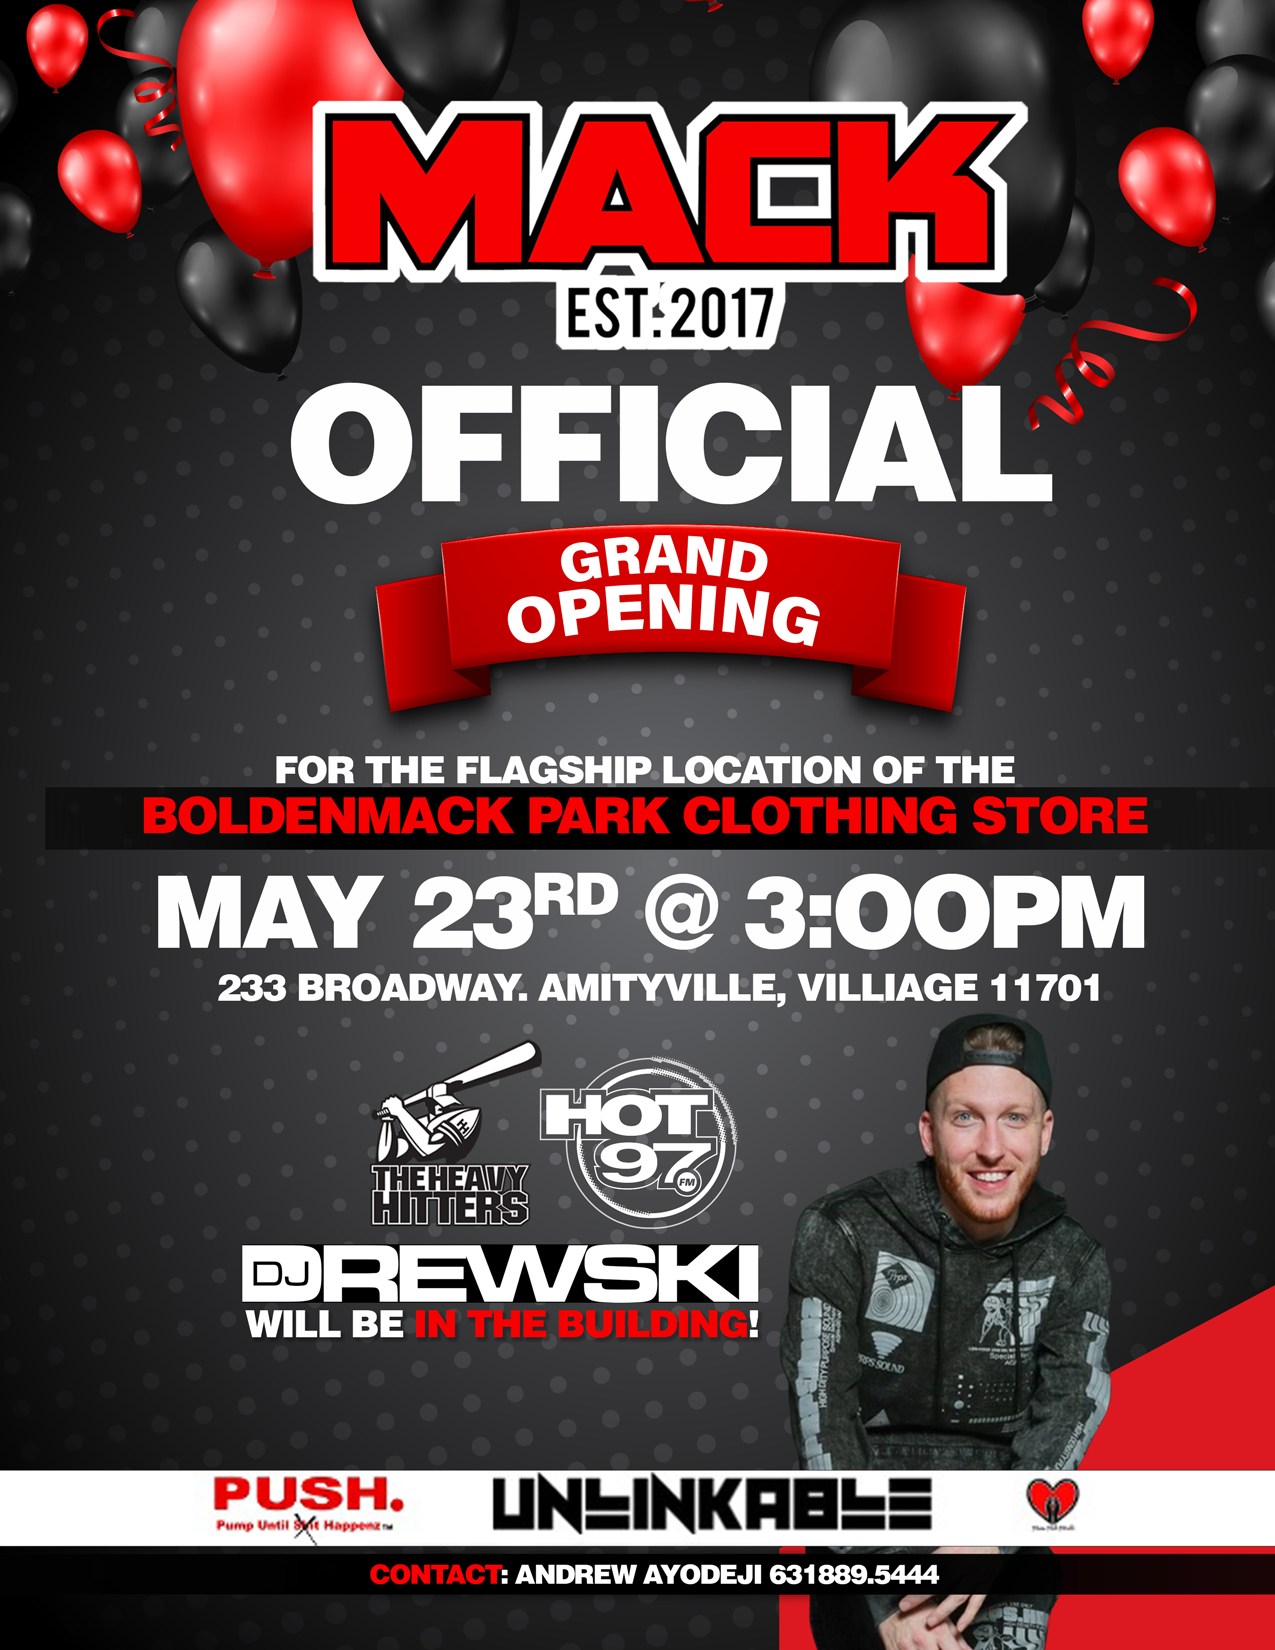 Grand Opening of the Mack Flagship Store this Sunday!!